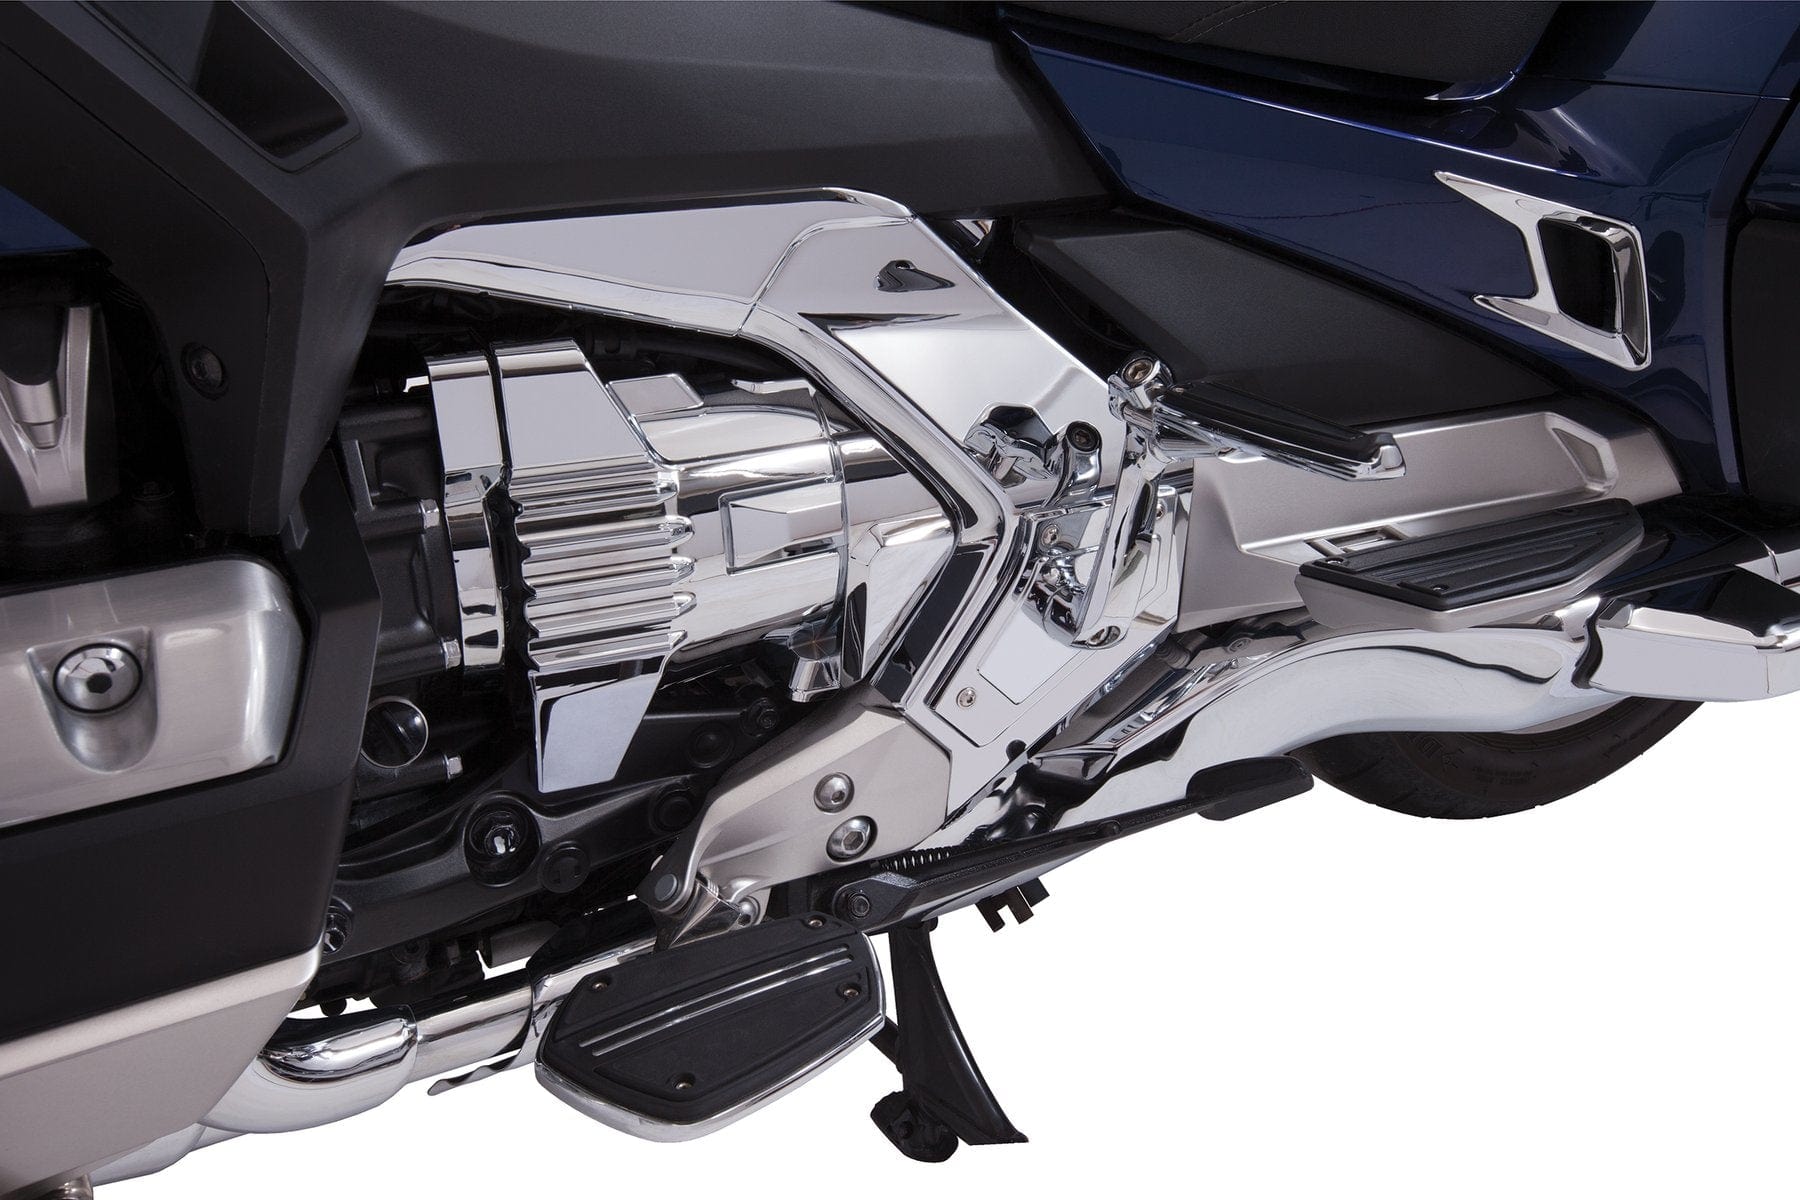 GoldStrike Trim Engine Covers for Gold Wing DCT Models